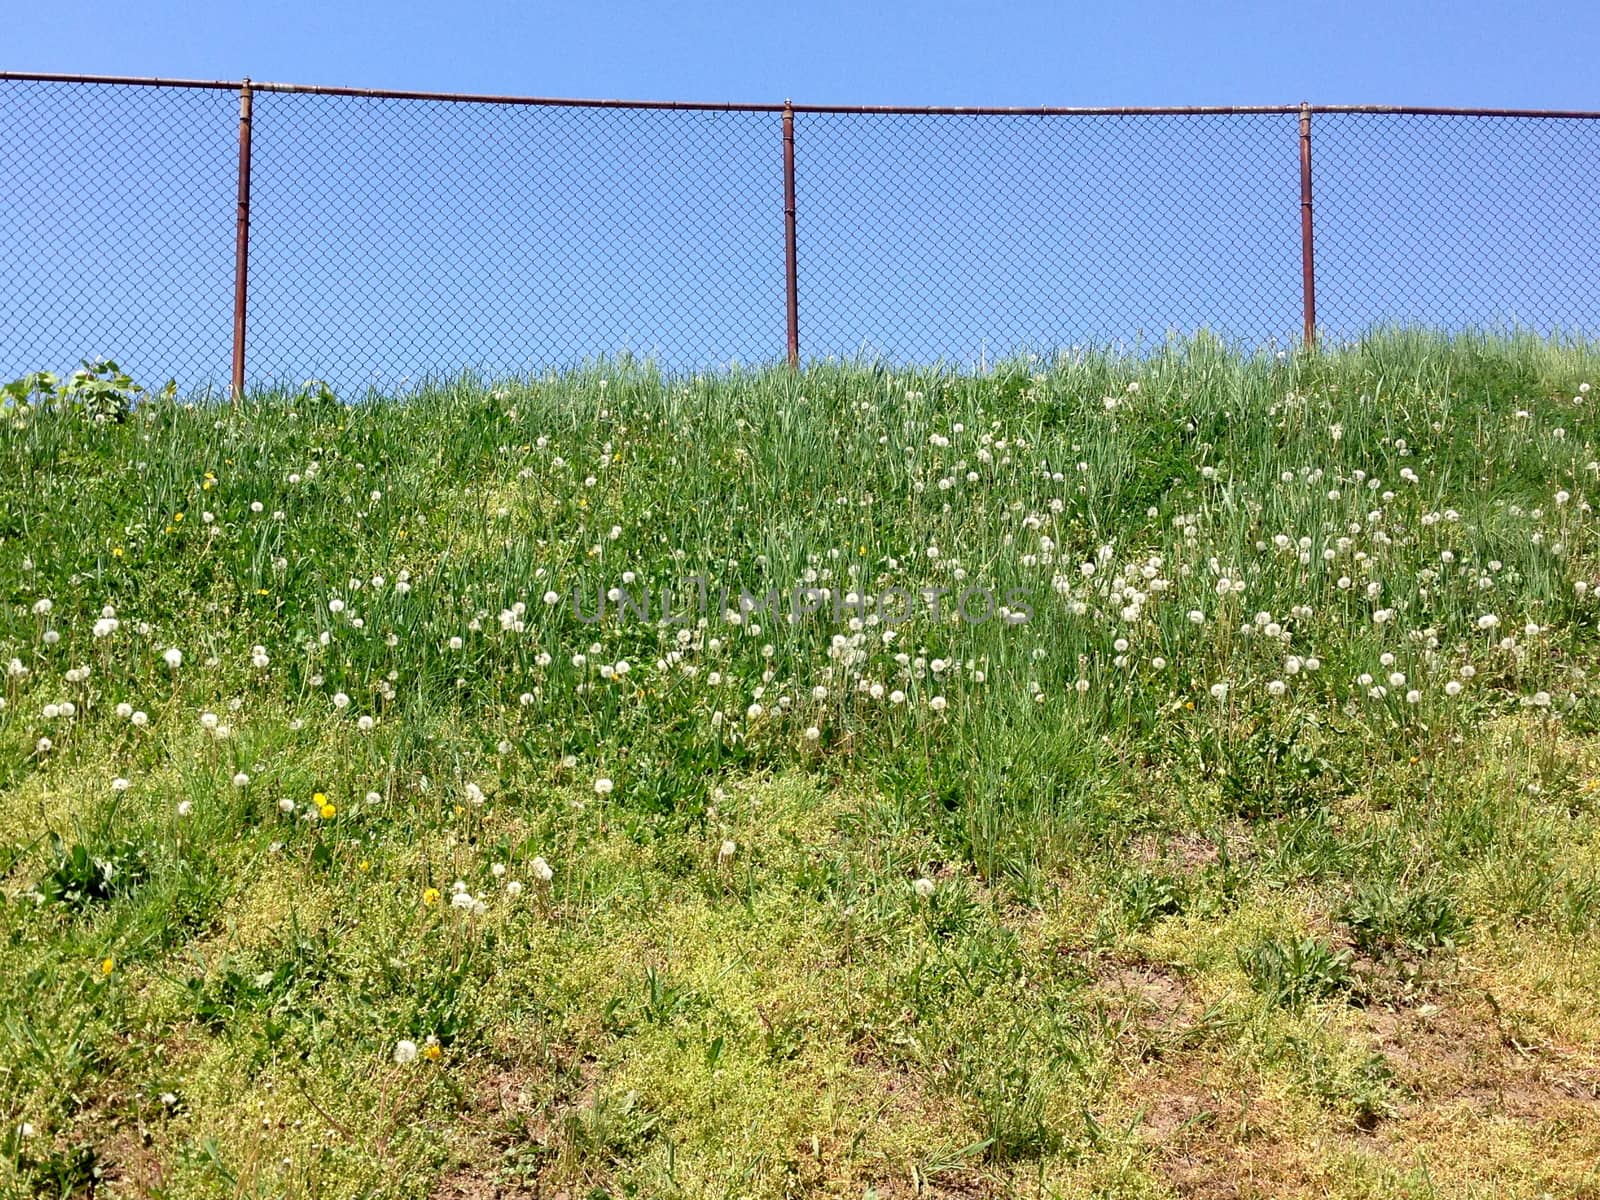 Fence, Tall Grass, and Dandelions by the_jade_greene